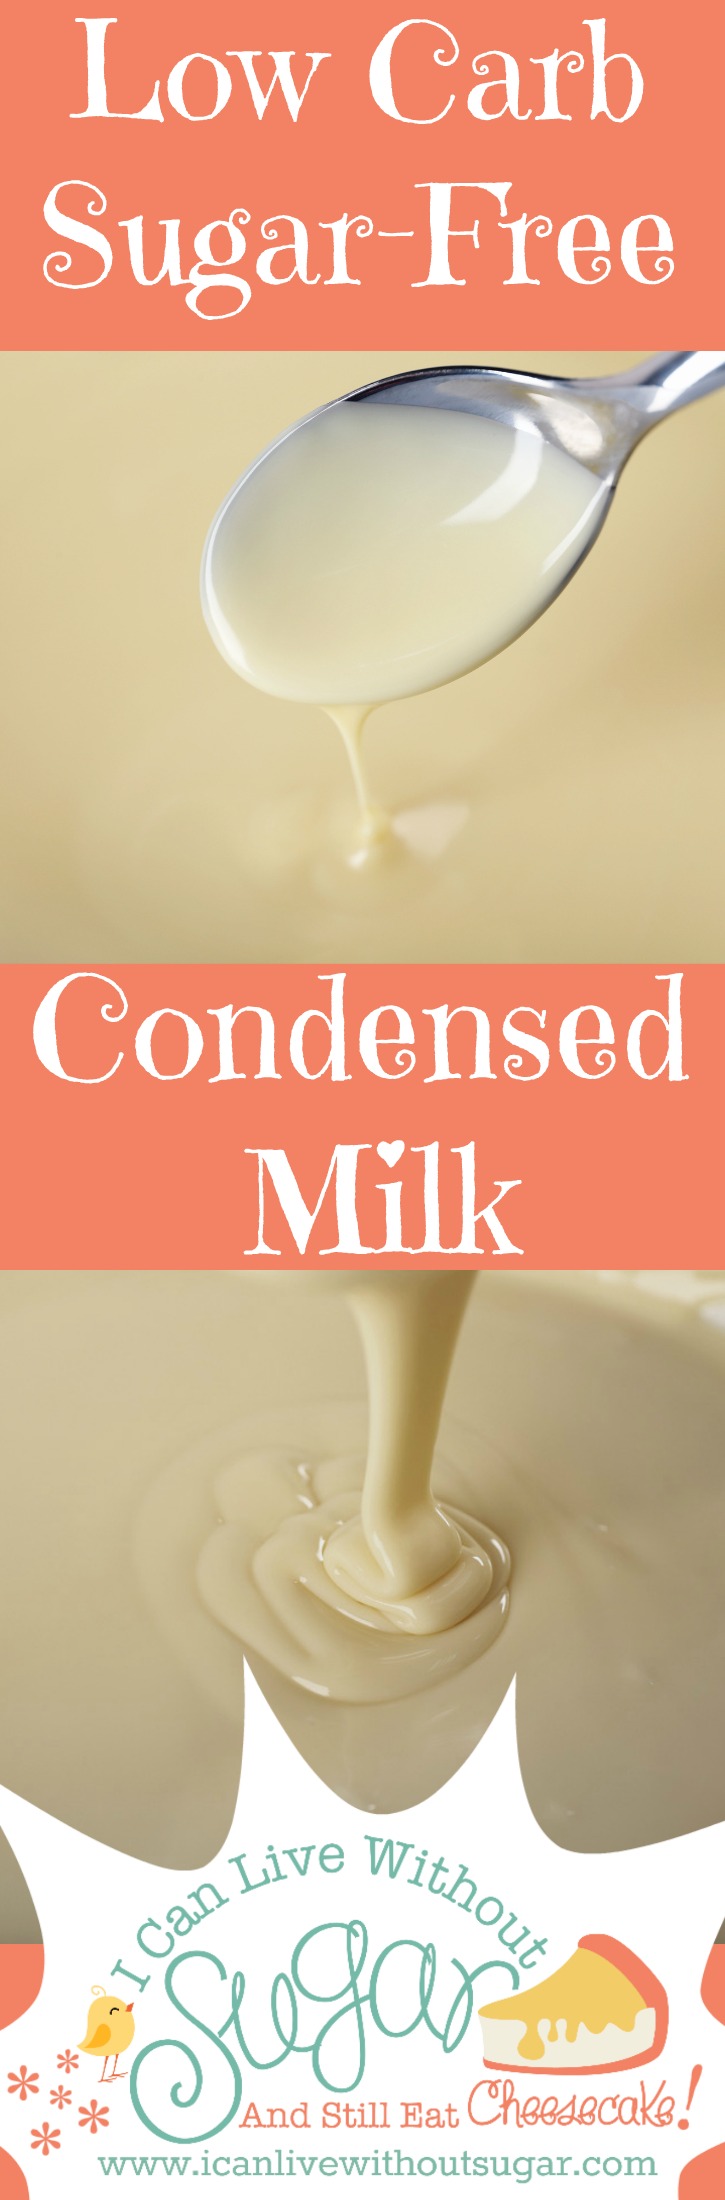 Low Carb Sugar Free Condensed Milk. Better than good. This tastes delicious. Make all your old faves guilt free. Granny never had it so good!